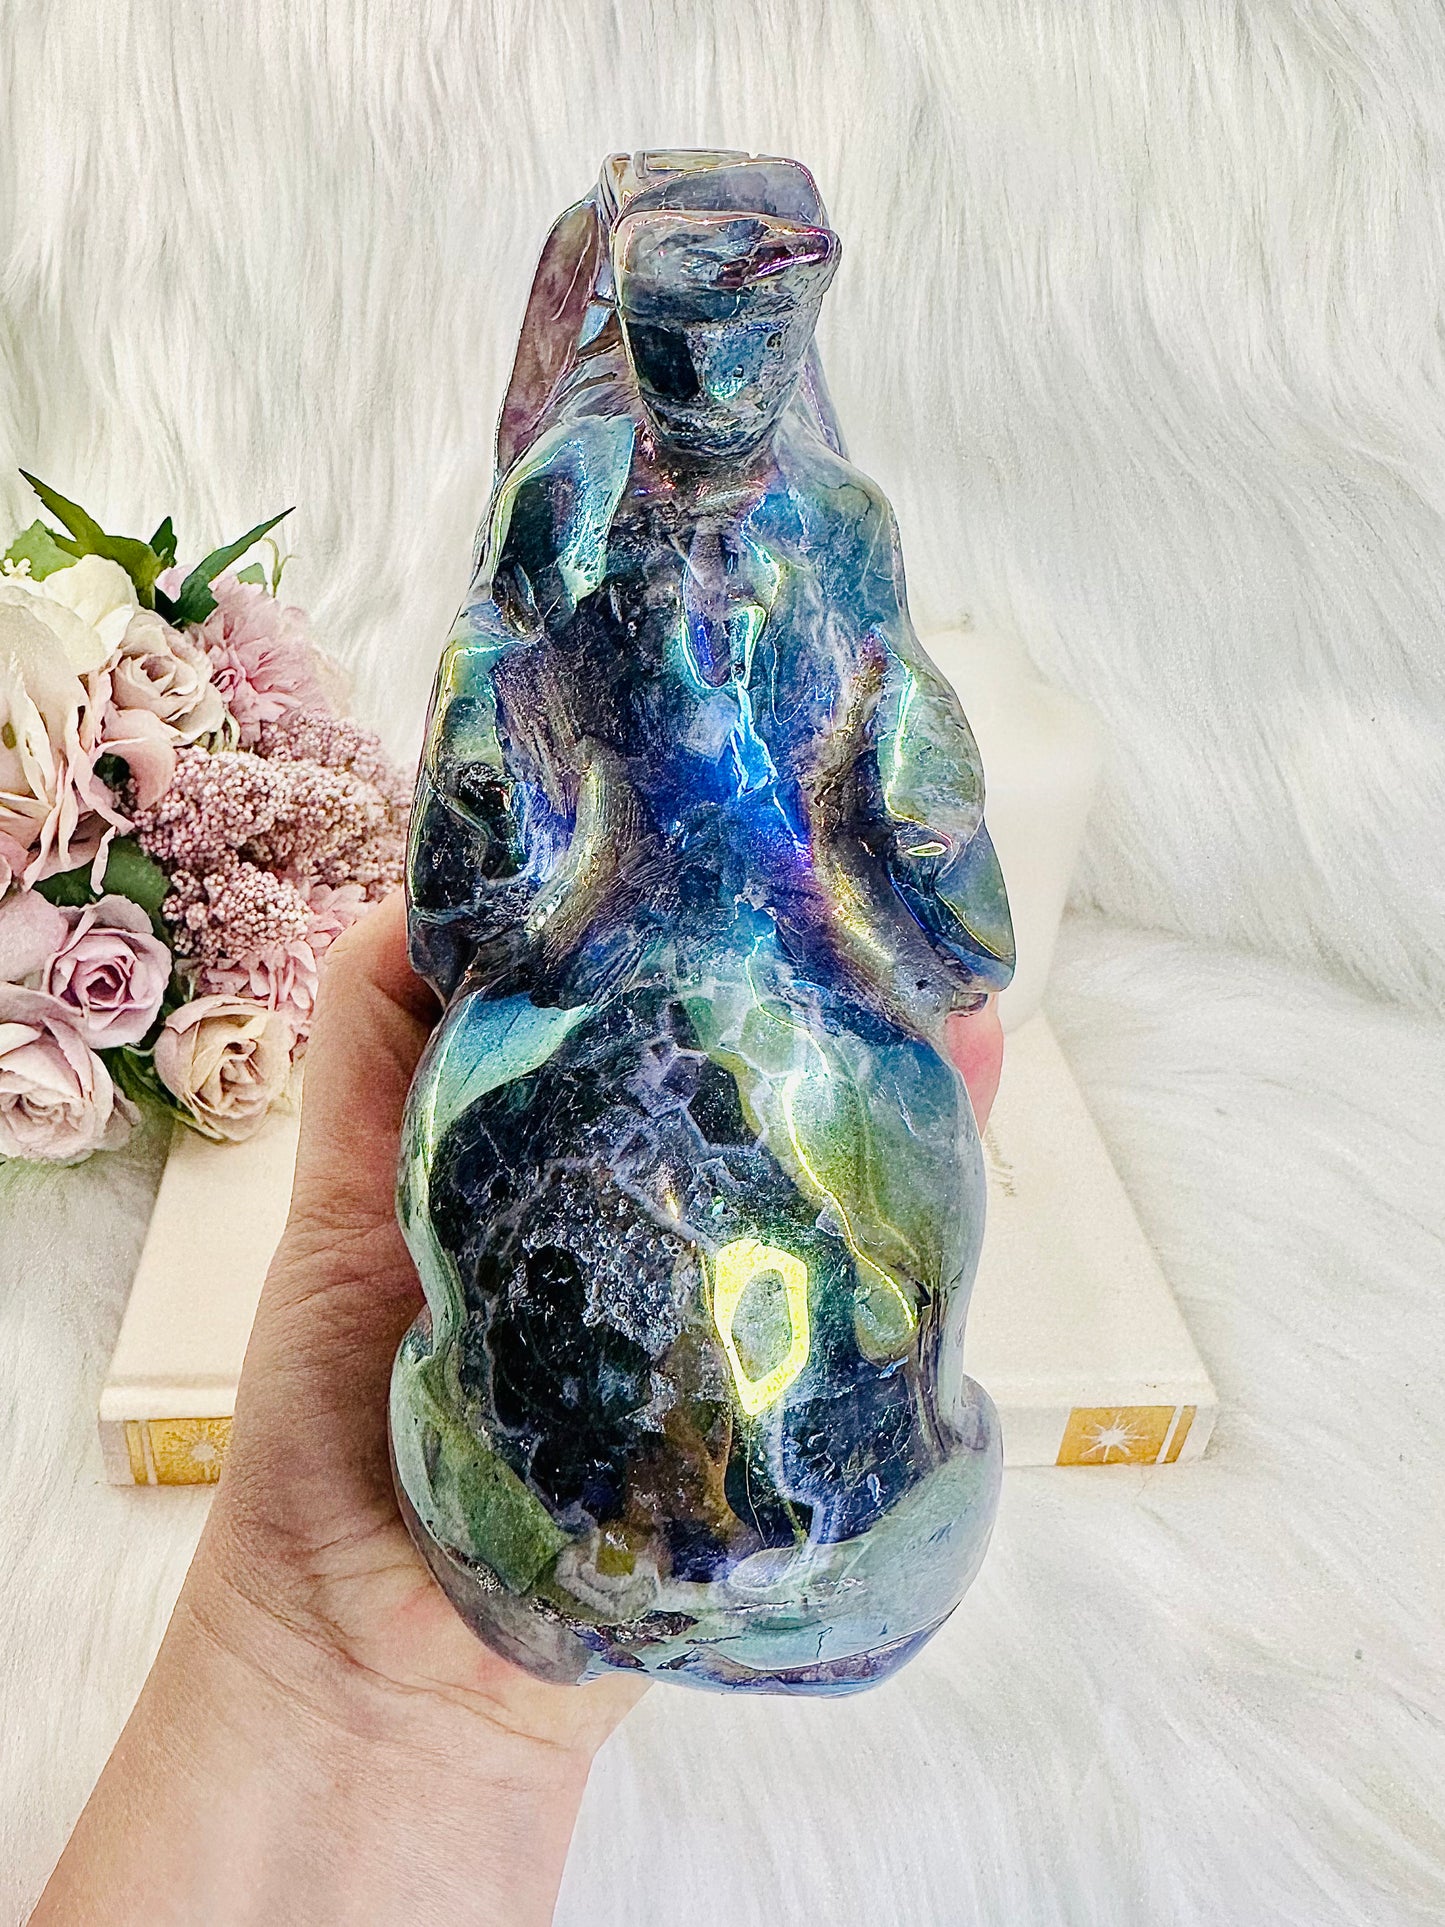 ⚜️ SALE ⚜️Fabulous Statement Piece !!!! Stunning Huge 1.34KG Chunky Angel Aura Dream Amethyst Elephant Carved To Perfection